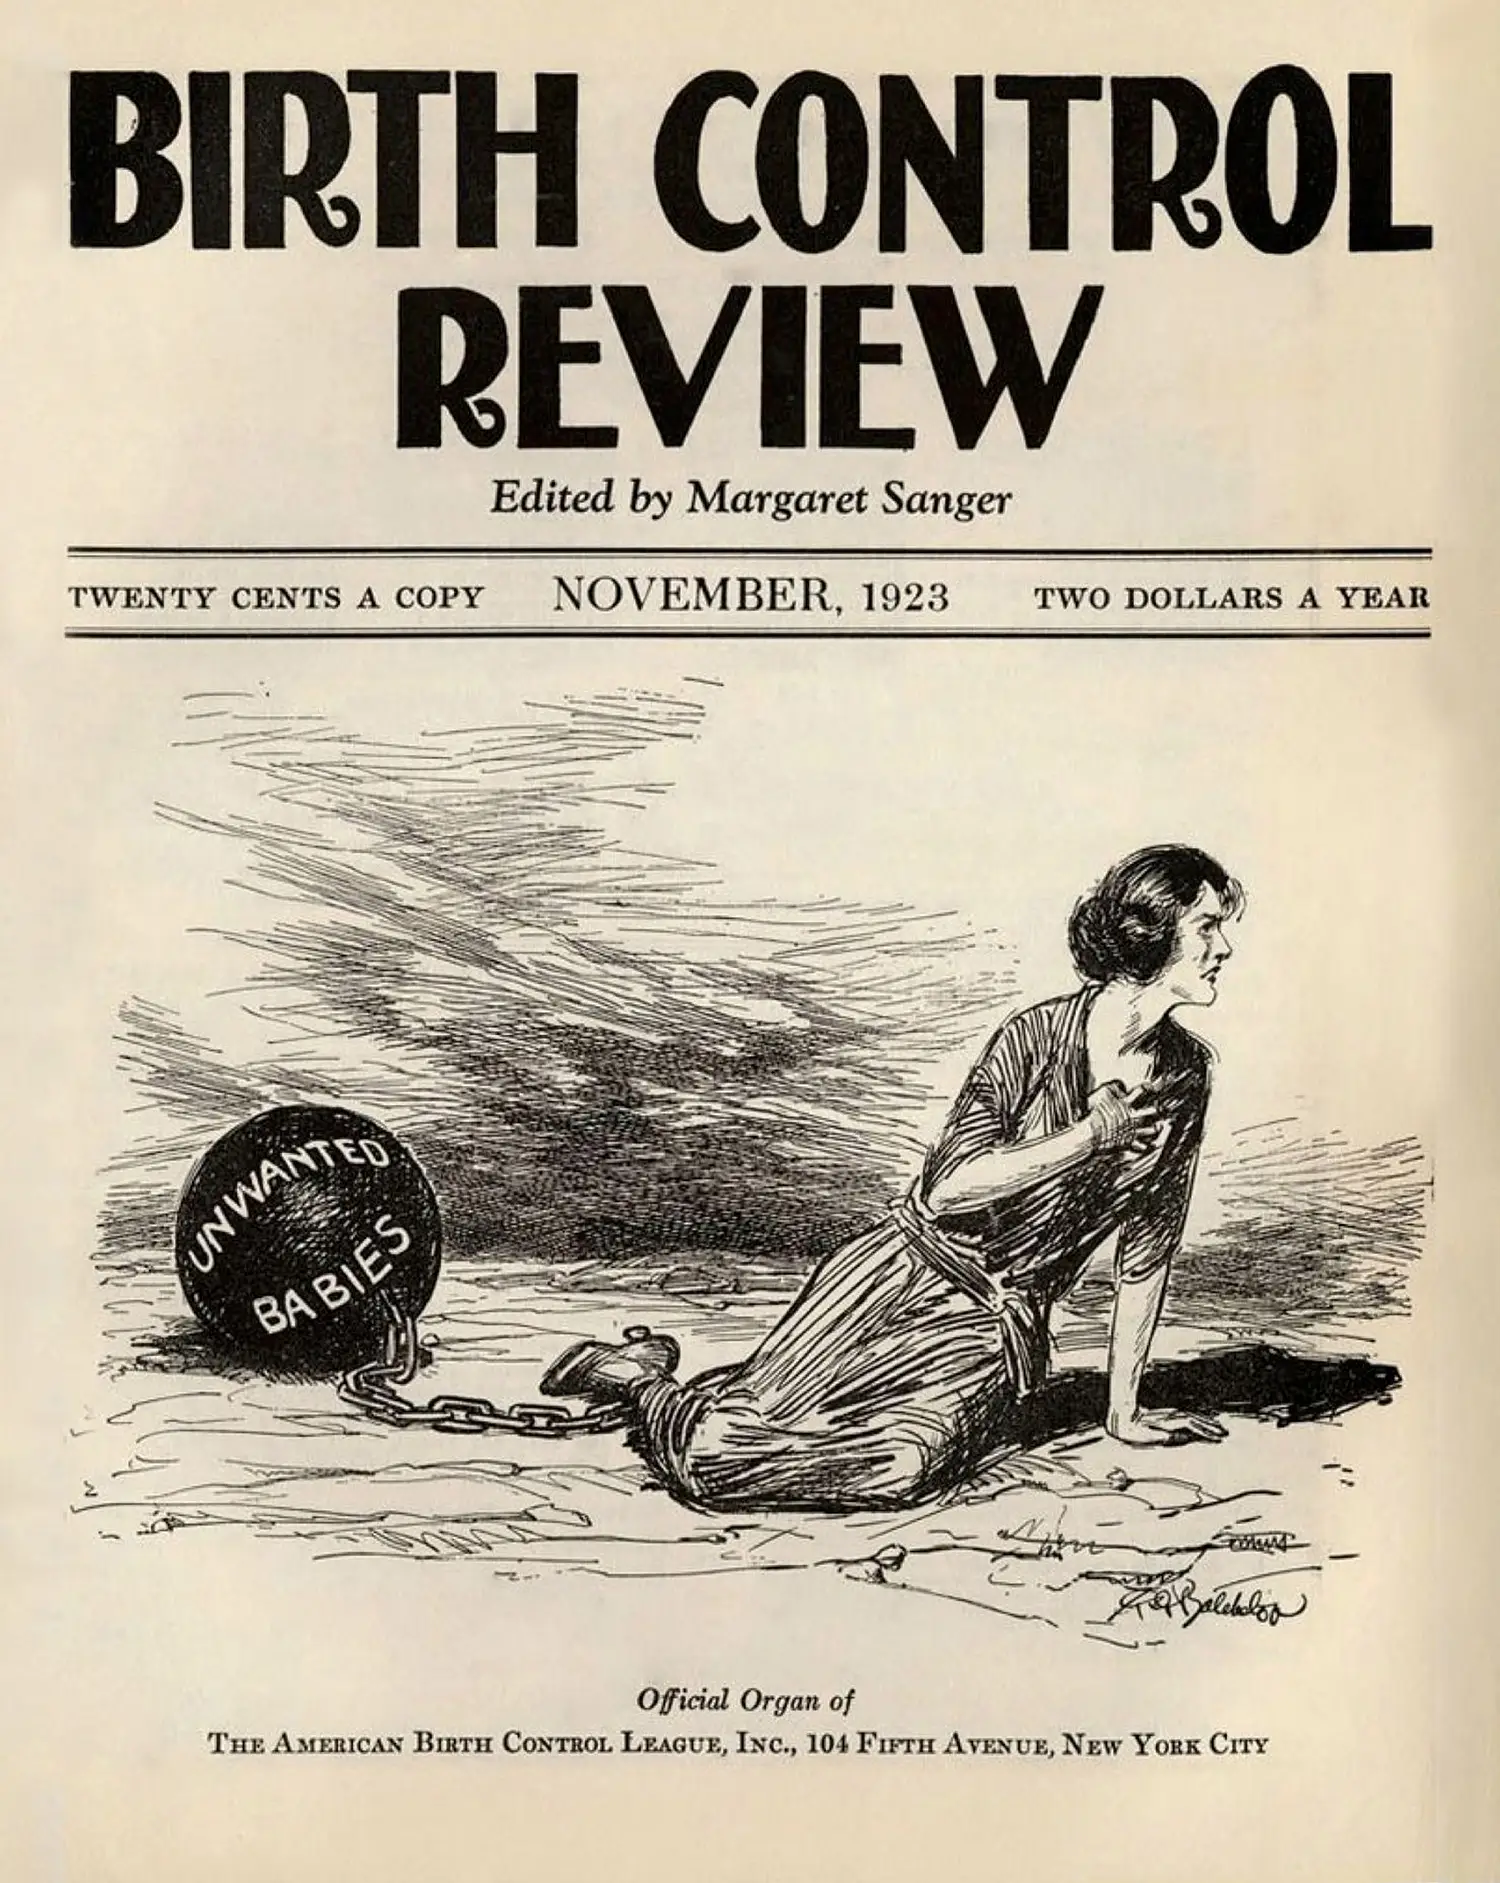 The cover page of “Birth Control Review” depicts a woman in agony chained to a large iron ball that says “unwanted babies.”